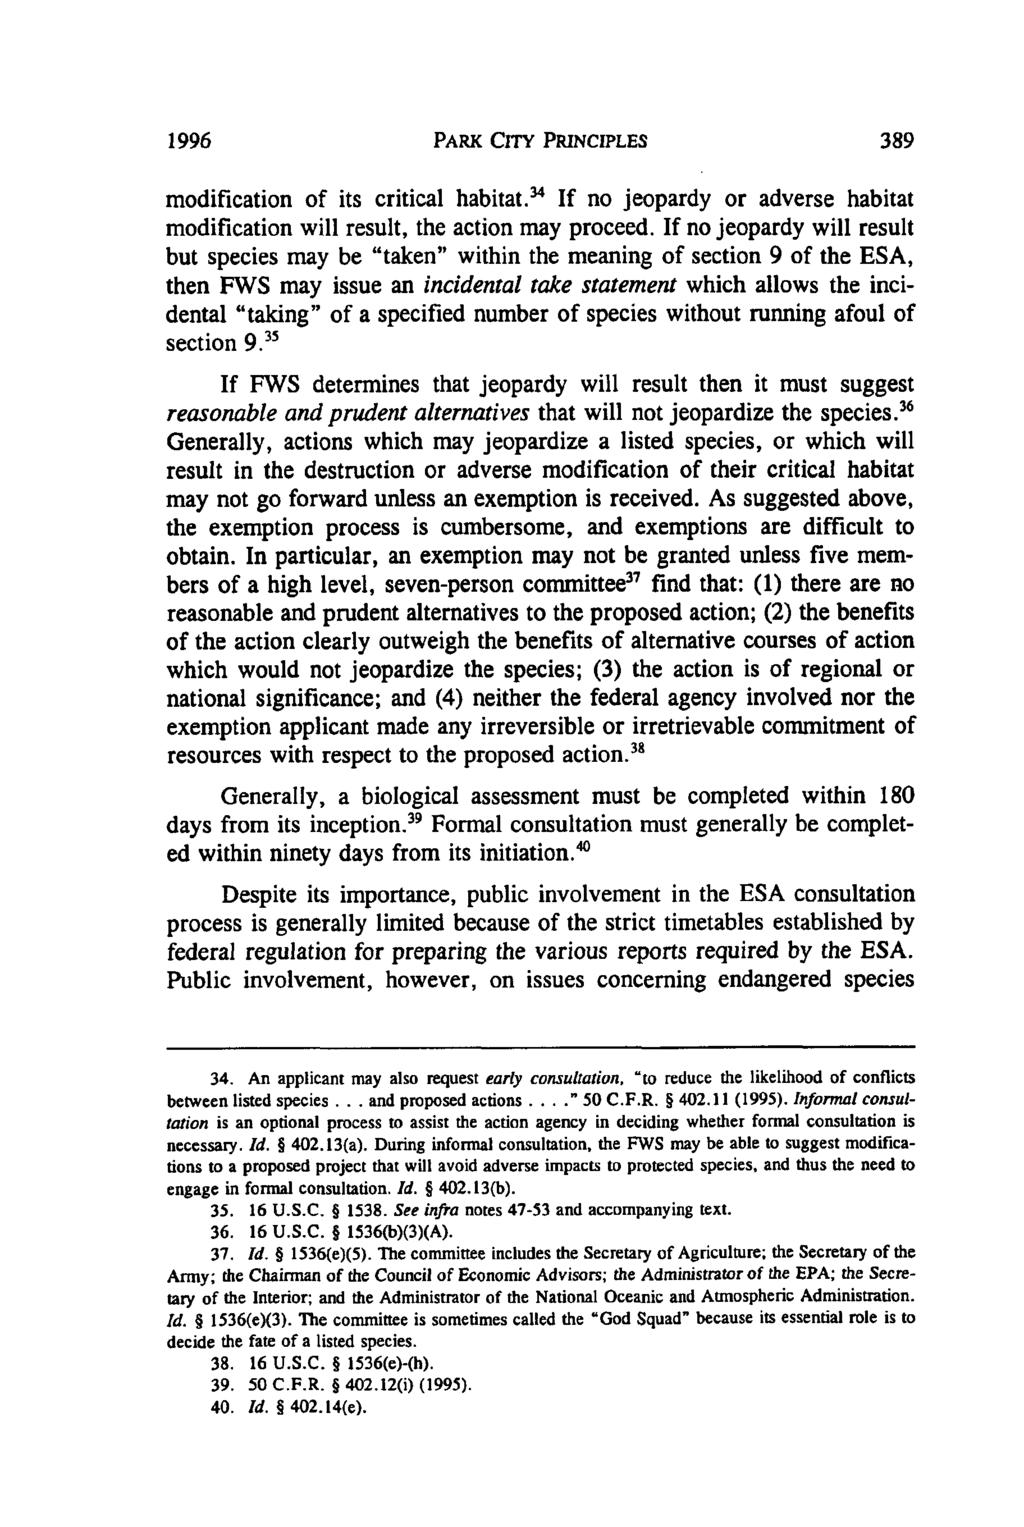 1996 PARK CITY PRINCIPLES modification of its critical habitat.' If no jeopardy or adverse habitat modification will result, the action may proceed.